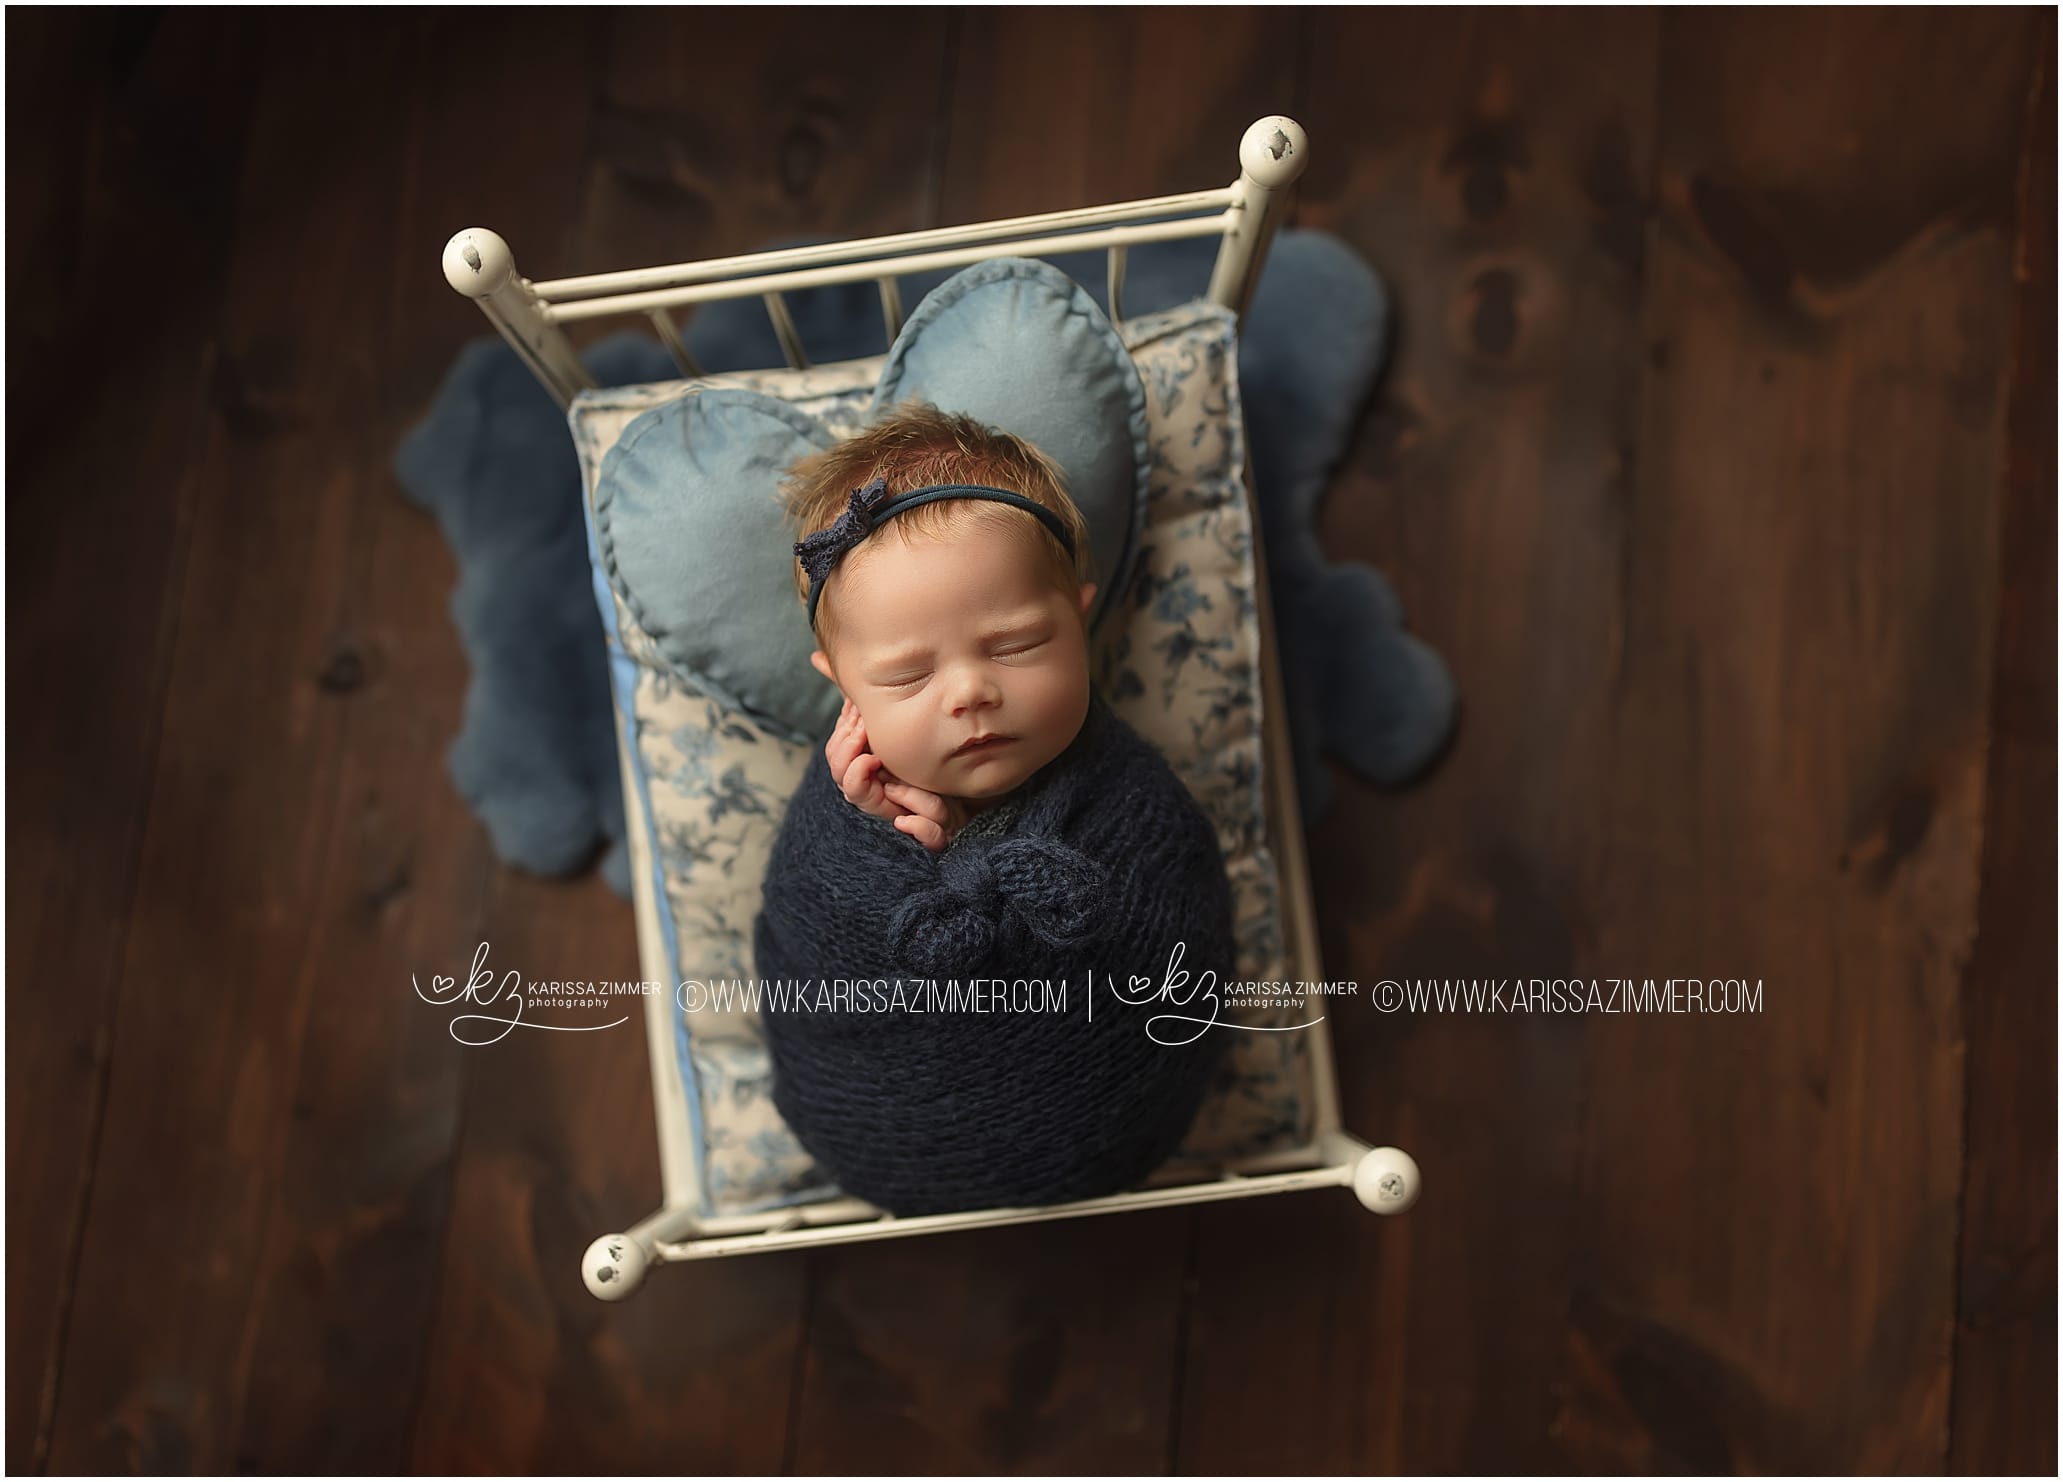 Best newborn photography studio photos in Central PA